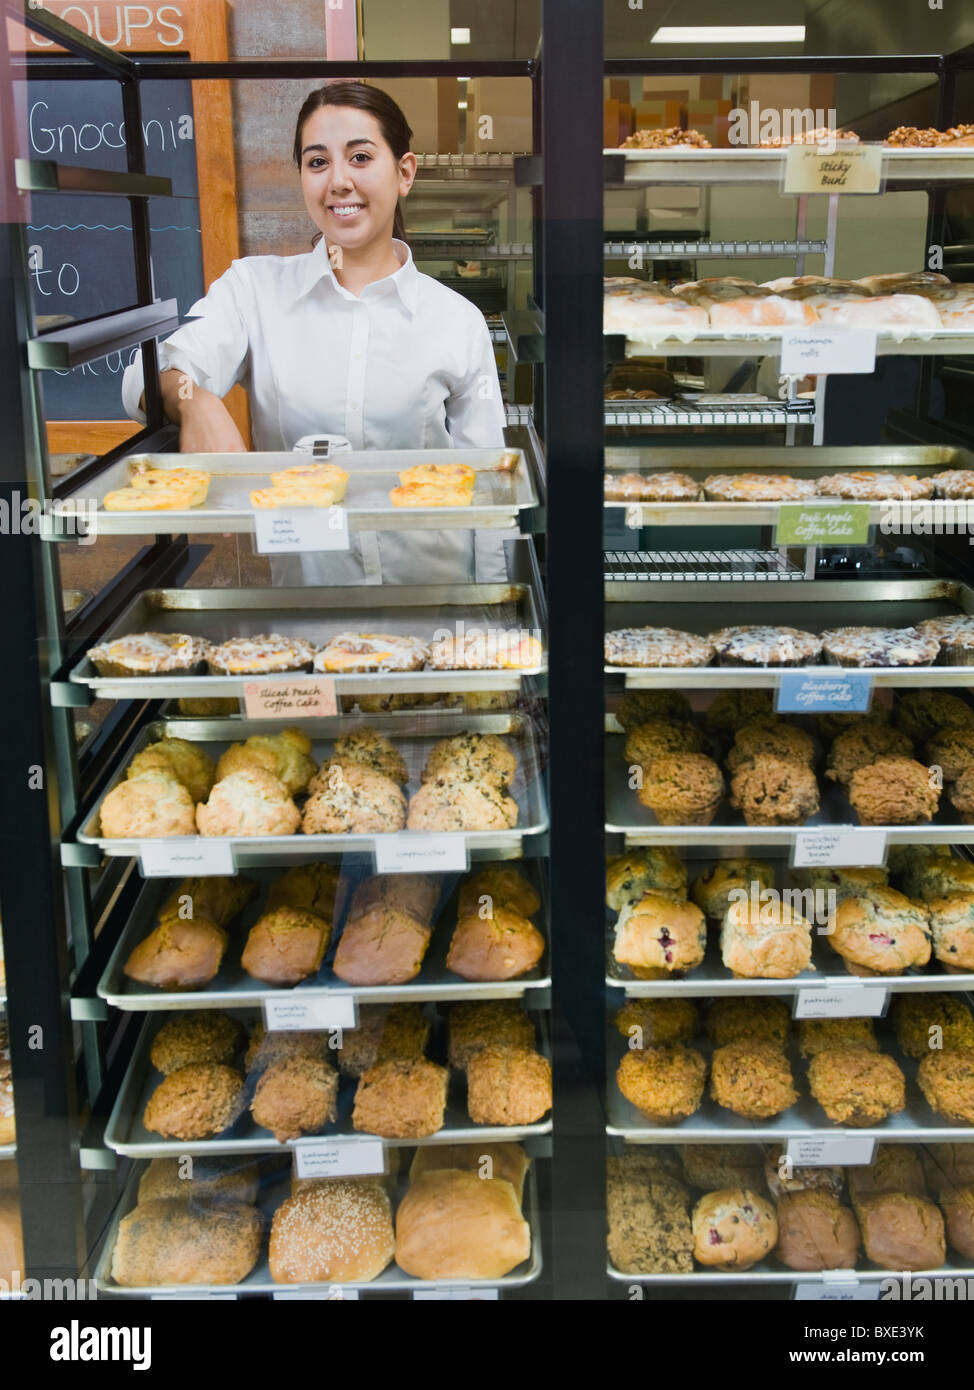 Baker standing behind trays of baked goods Stock Photo